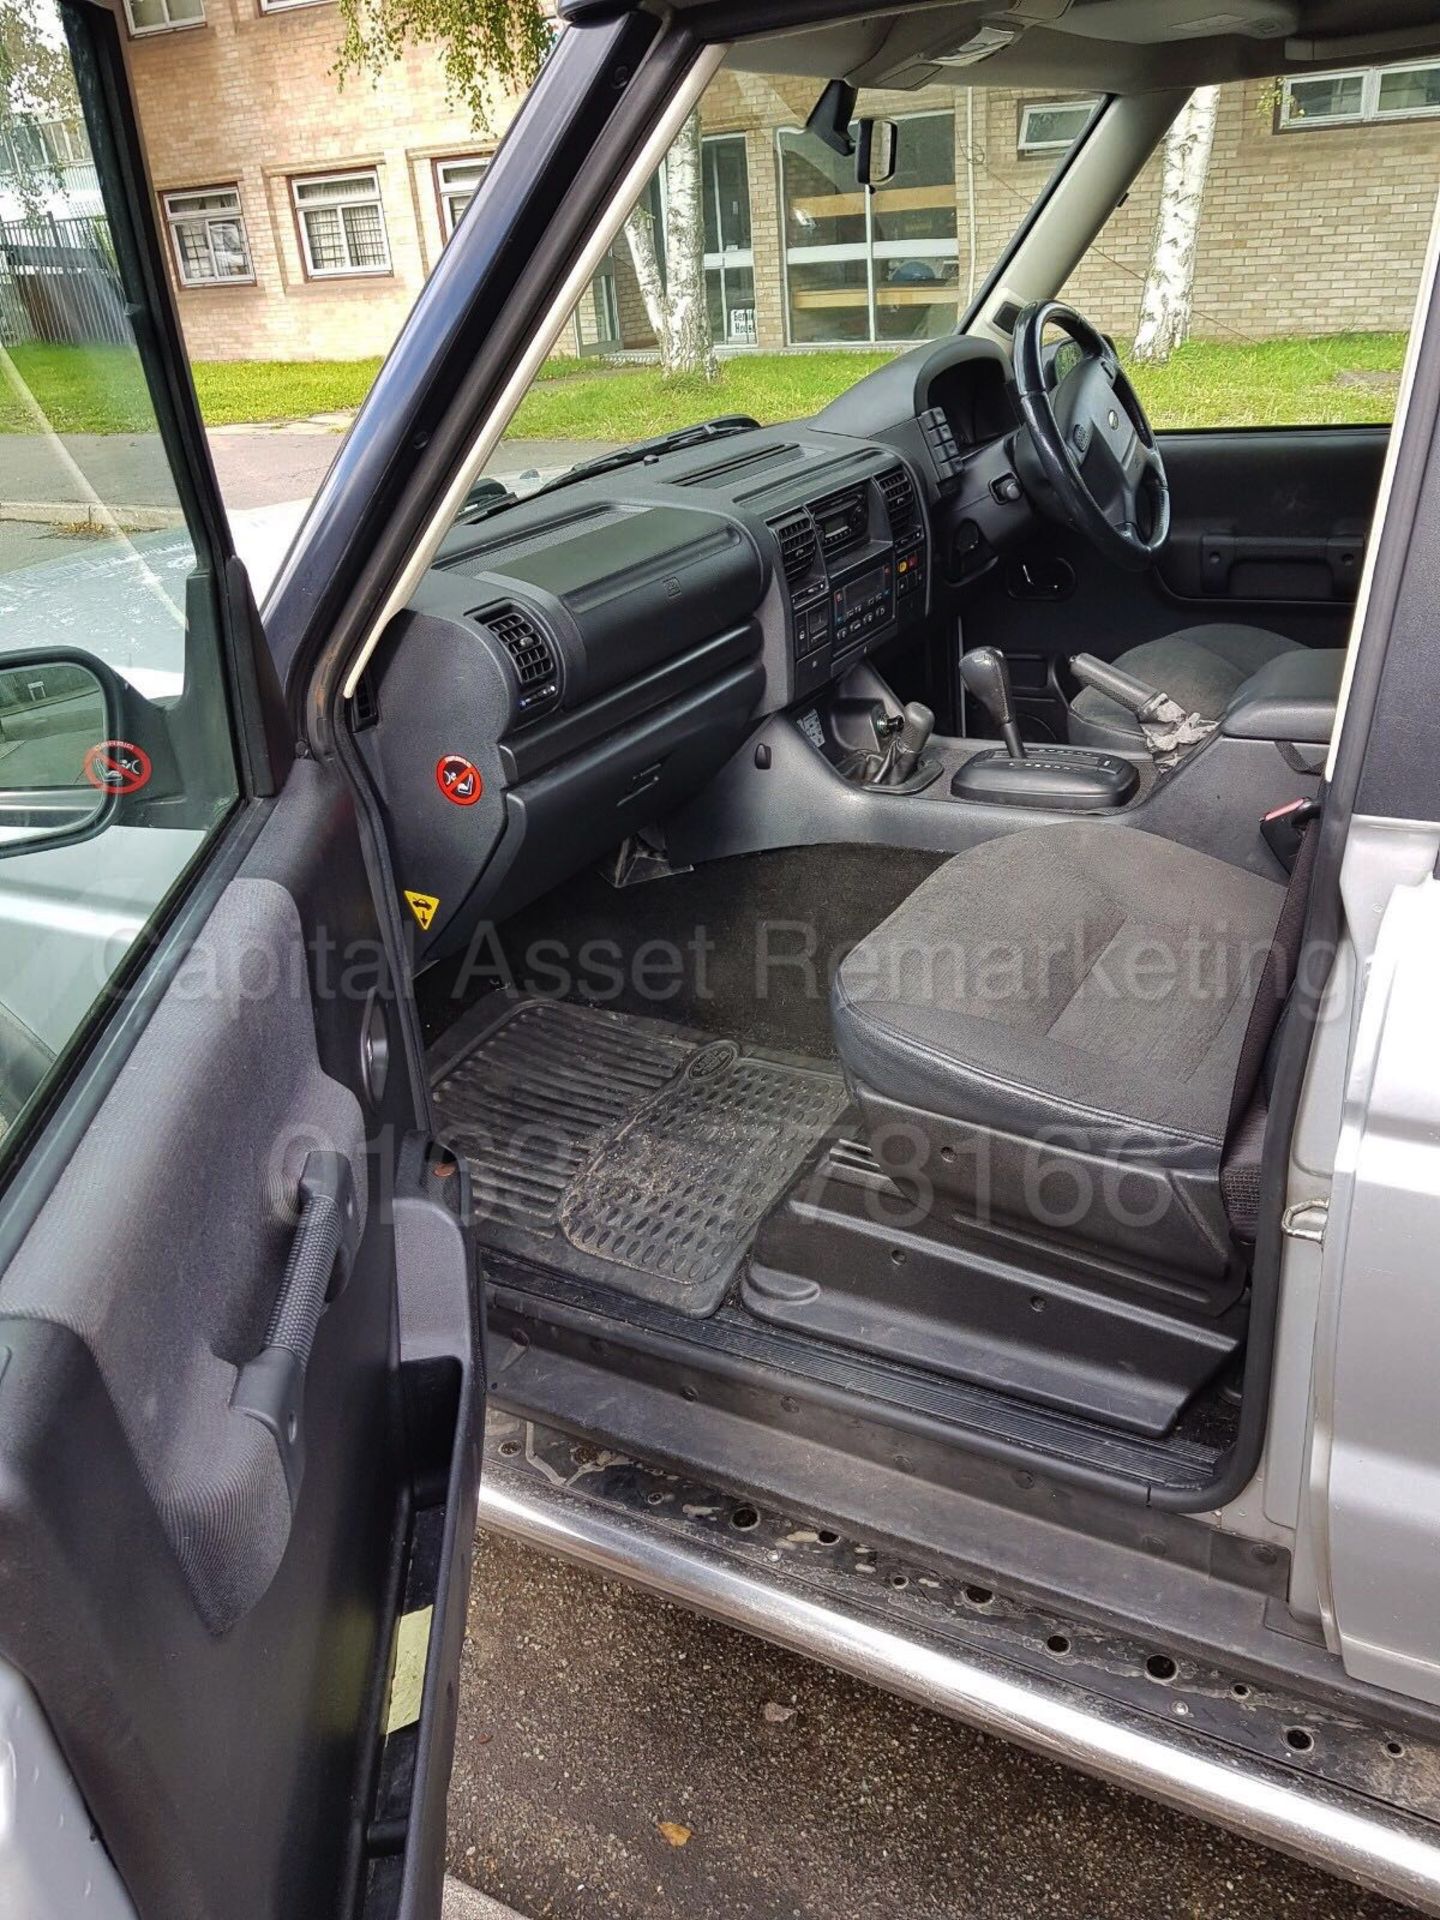 (On Sale) LAND ROVER DISCOVERY 'GS EDITION' (2004 MODEL) 'TD5 - AUTO - 7 SEATER' (NO VAT - SAVE 20%) - Image 9 of 16